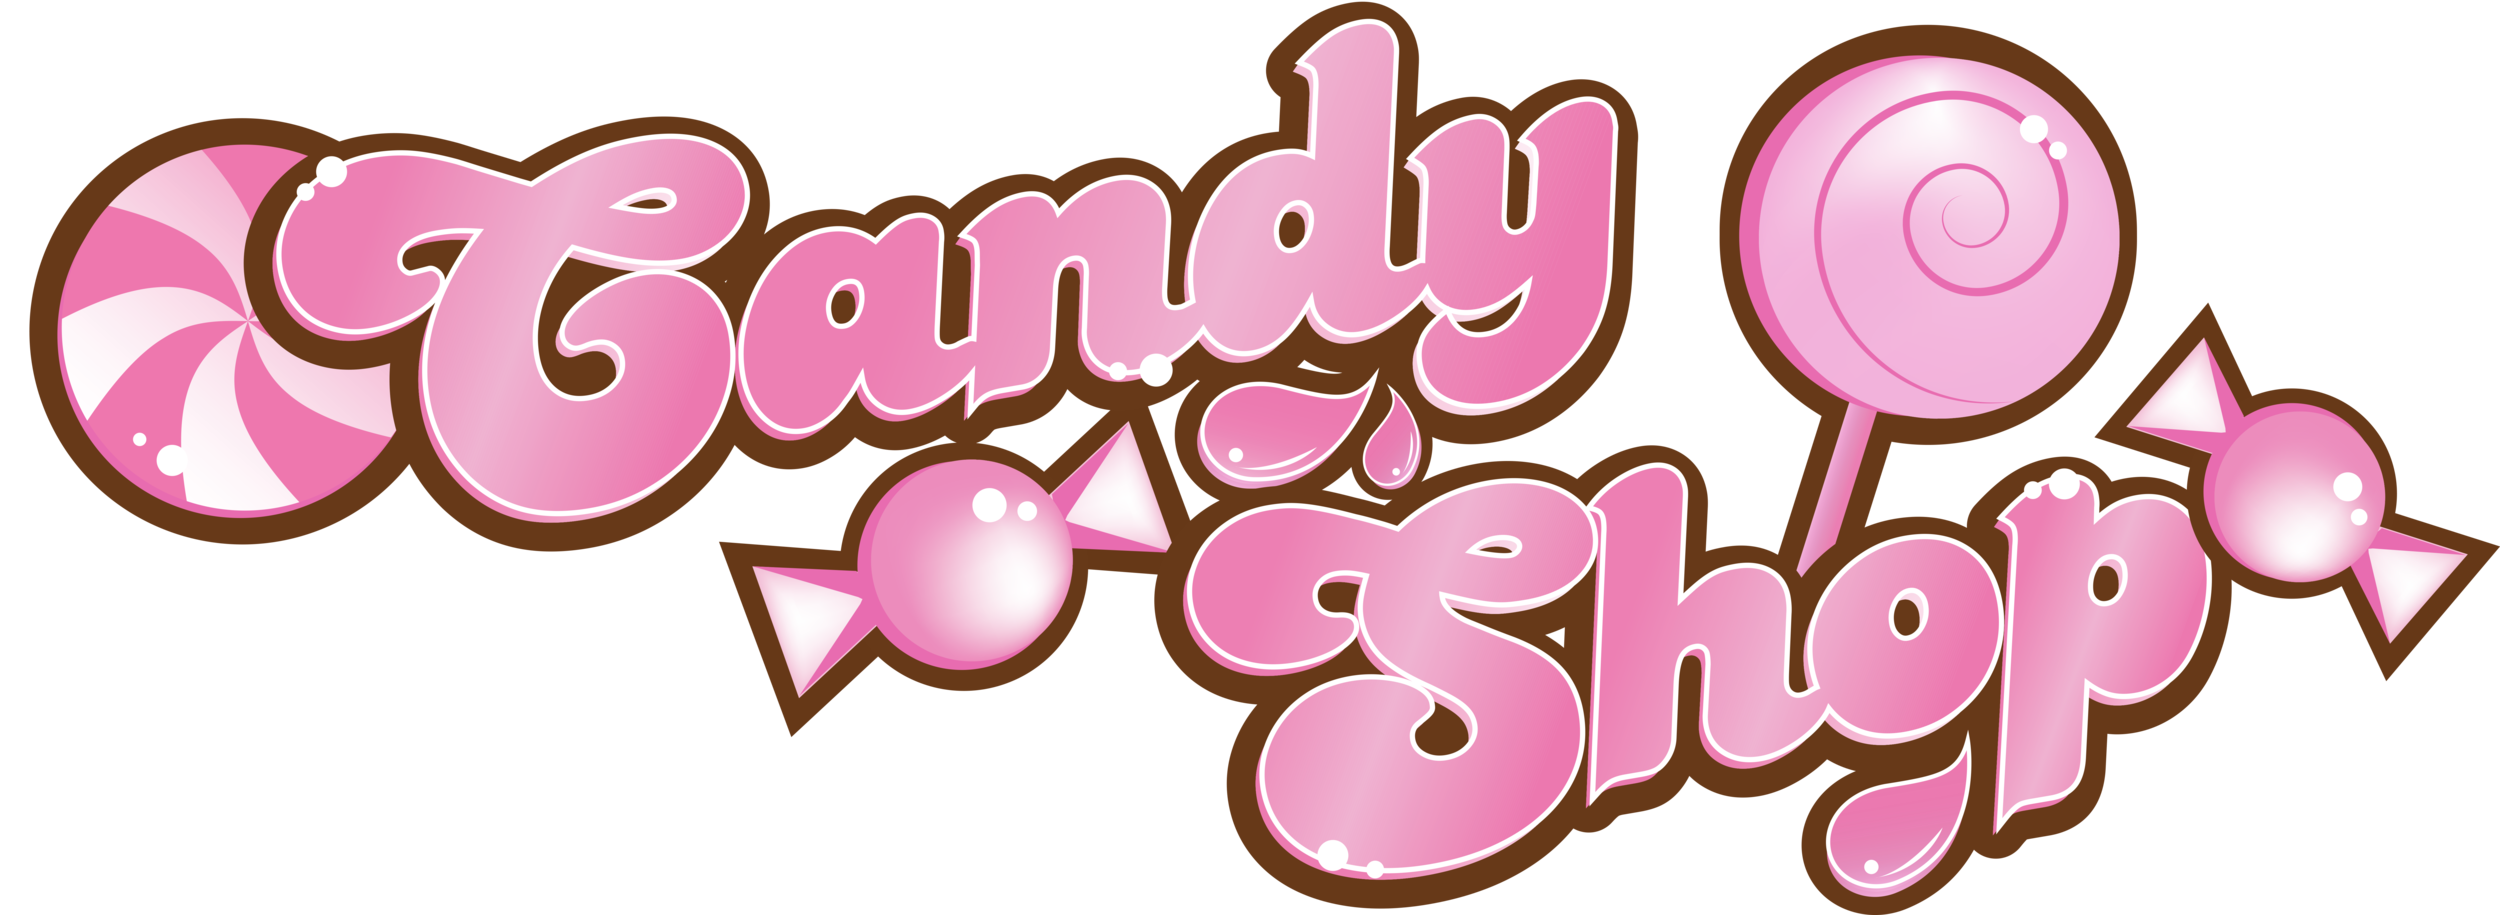 CANDY SHOP.png